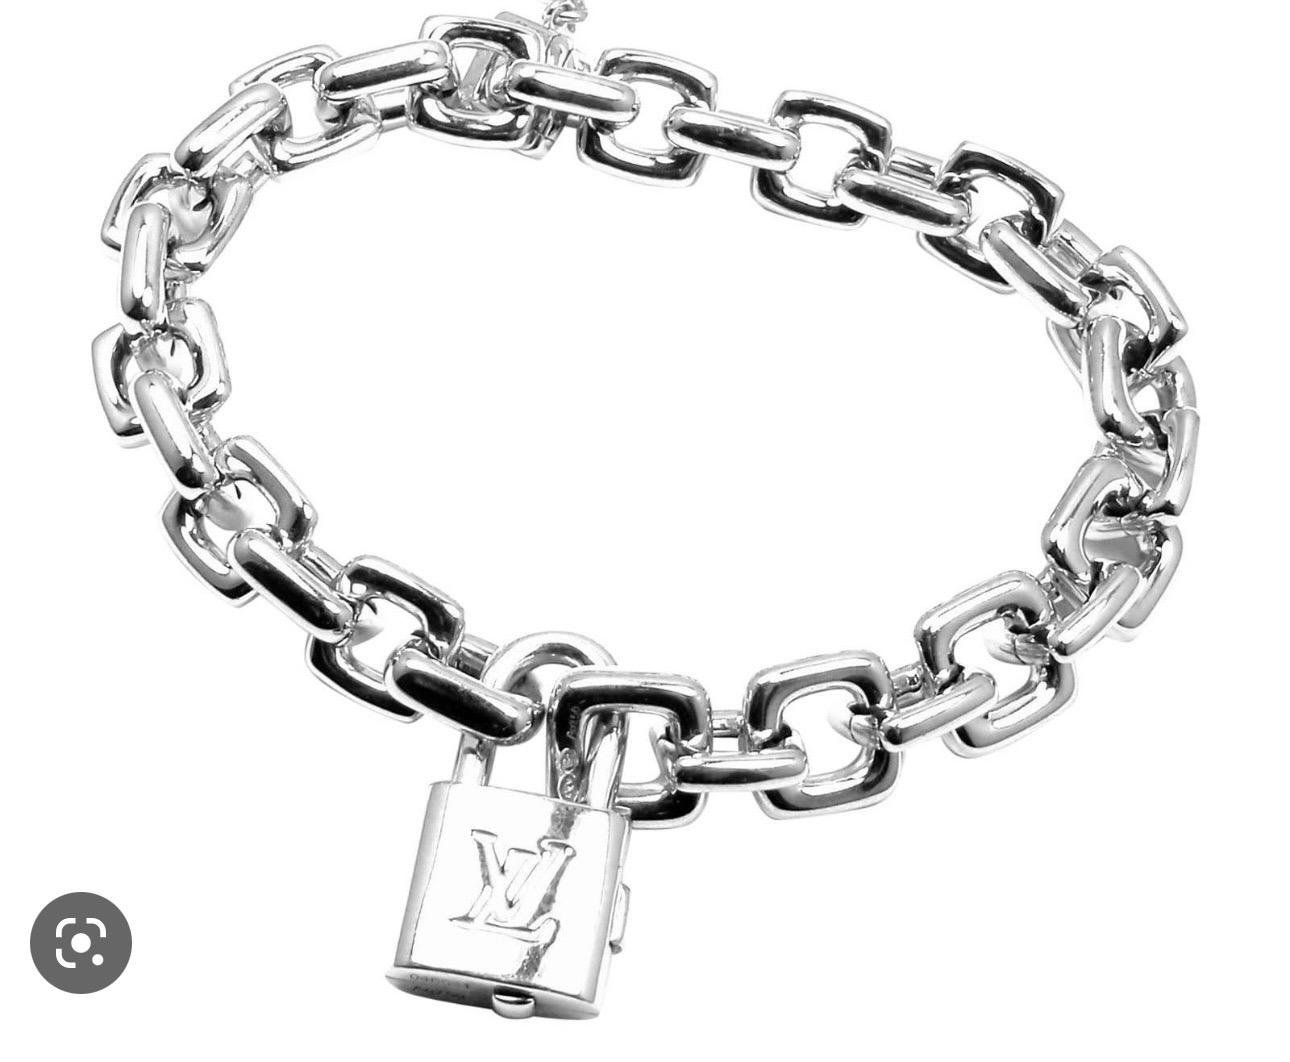 Louis Vuitton Locket Chain Vintage Link Bracelet in 18 Karat White Gold, 87 Gm In Excellent Condition For Sale In New York, NY